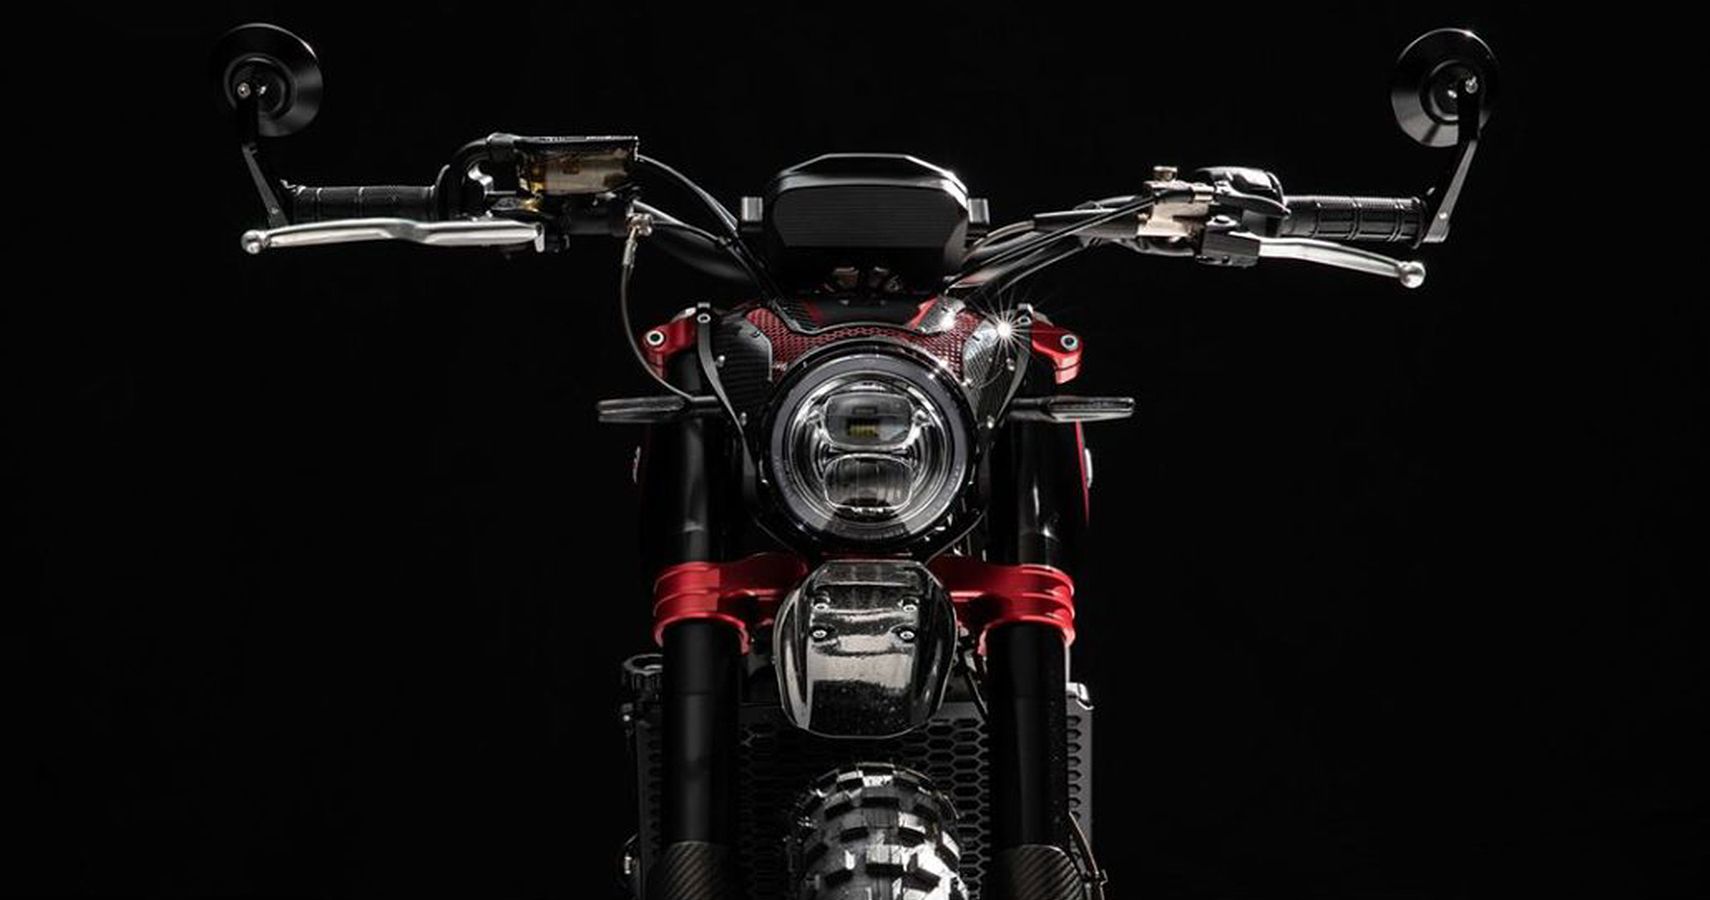 We Don’t Just Mean The Spitfire As An Adjective Here, But As The Actual Name Of The Motorcycle, A Scrambler By CCM